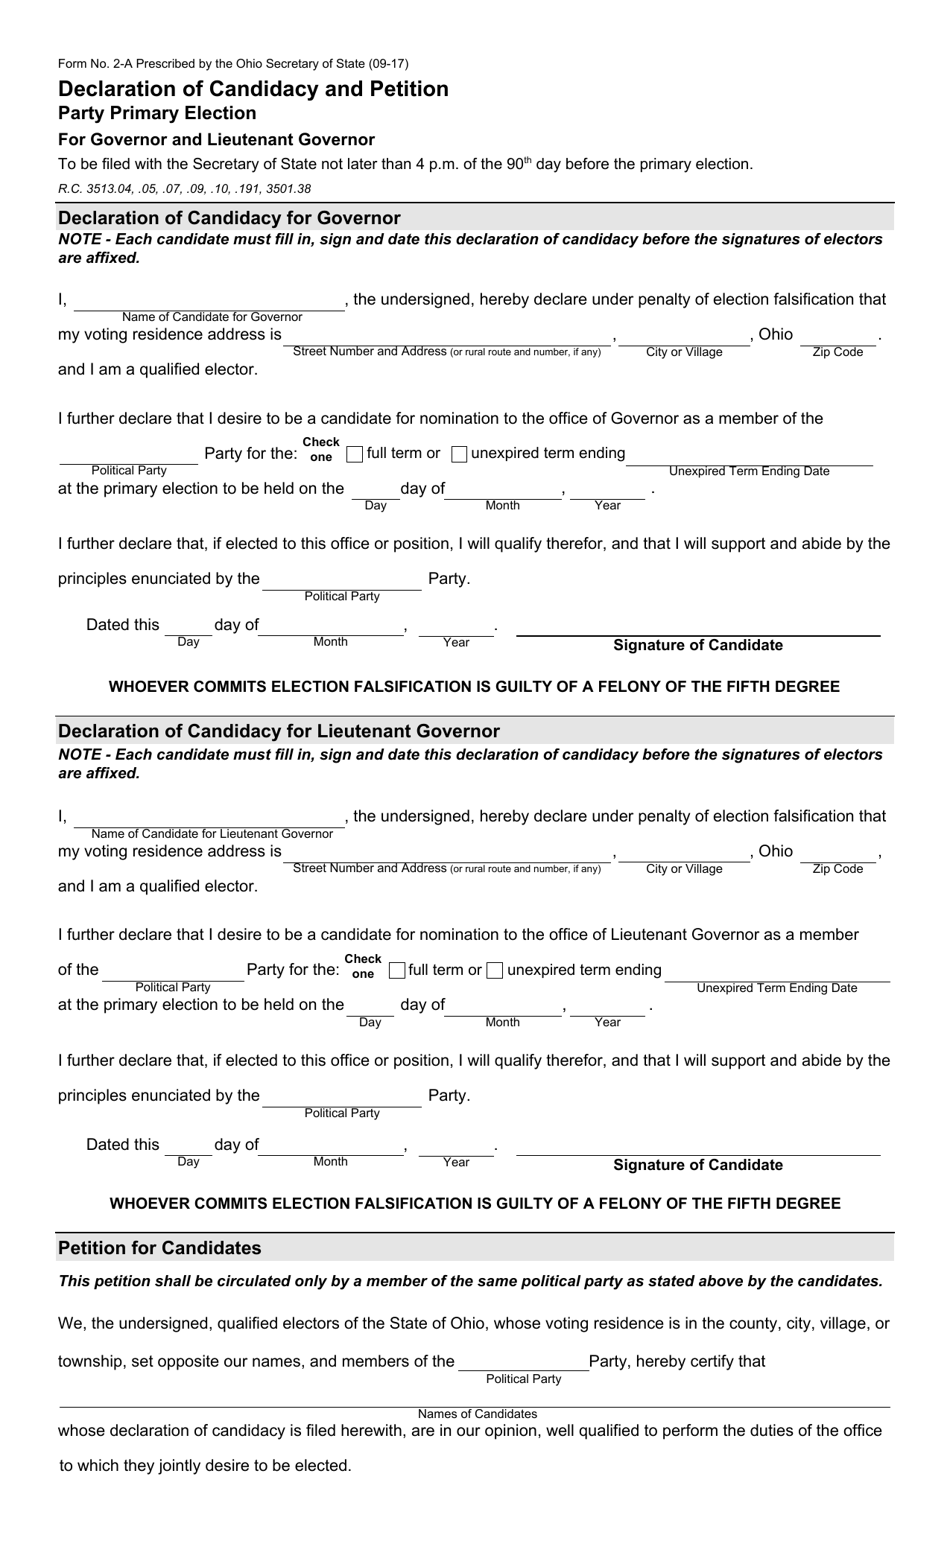 Form 2-A Declaration of Candidacy and Petition - Party Primary Election for Governor and Lieutenant Governor - Ohio, Page 1